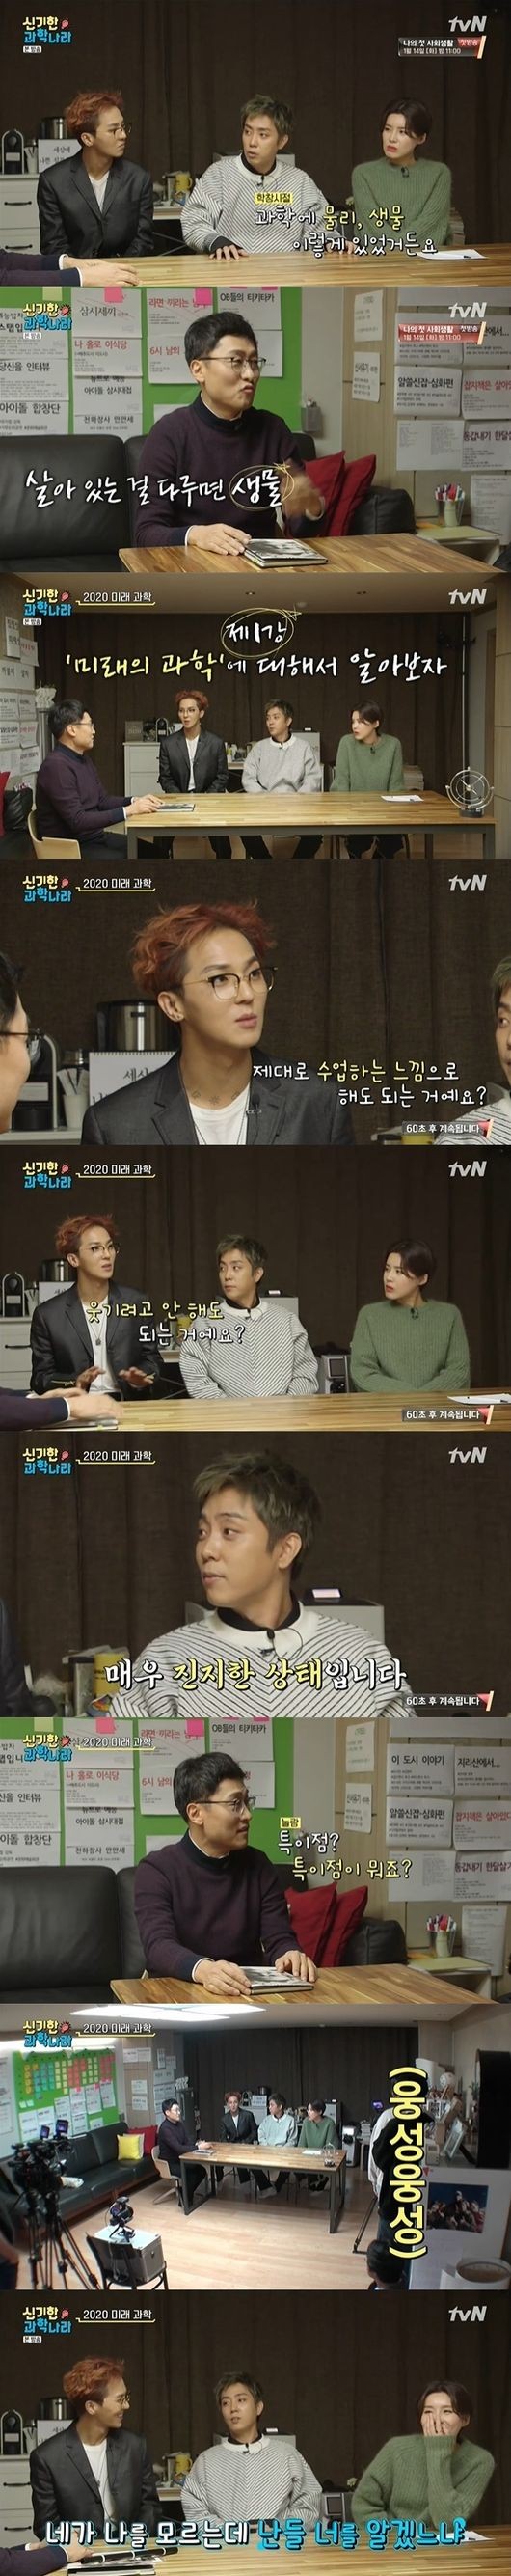 Friday Friday night presented various corners that satisfy the various tastes of viewers.On the afternoon of the 10th, TVN Friday Friday night, the entertainment combination that believes in Eun Ji-won to Lee Seung-gi made a big smile.Friday Friday Night is a program in which six short-form corners of different materials, including labor, cooking, science, art, travel, and sports, are made up of omnibus formats.Short, different themes of about 10 minutes gave viewers a boring fun.Na Young-Seok PD, Shishi Sekisui Sea Ranch and Spanish boarding Jang Eun-jung PD co-directed.On this day, there are six corners from Hong Jin-kyungs My Friends Recipe to Eun Ji-won, Song Min-ho, Jang Doyeons Scienceful Science Country, New York City of Lee Seo-jin, Park Ji-yoon Announcer and Han Jun-hees  Its been released.Professor Kim Sang-wook and Professor Yang Jung-moo, who appeared in Alsul Shin-Job 3 and How Do You Adult, appeared in The Wonderful Science Country and The Wonderful Art Country respectively.Professor Kim Sang-wook has unravelled his expertise, science common sense, to three people, Eun Ji-won, Song Min-ho and Jang Doyeon, through A Wonderful Science Country.Eun Ji-won said, I wonder what physics and creatures are, There was a great debate before you came: does a cold not catch in cold places, in the Arctic or Antarctica?I asked the wrong question.In addition, Professor Yang Jung-moo talked about common sense of art in New Art Country.Jang Doyeon said, I want to know the most expensive painting in Korea. Professor Yang Jung-moo said, The work of Kim Hwan-kis universe was traded at 13.1 billion won at the auction of Korean art, and it was not revealed yet because it was personal information. Science and art education, which are explained at the eye level of the three people, have become more interesting to see as they are well-informed by viewers.Lee Seung-gi has co-worked with Na Young-Seok PD for a long time since 1 night and 2 days through Factory of Experience Life.Lee Seung-gi, who found the factory in the hillside, caught a birdtail on a boat: Why is this dress youre wearing now, all this familiar? Rubber gloves are familiar. Theres no sense of heterogeneity.I was in Seoul for a long time and I tried to take a sophisticated image. Lee Seung-gi, who was enthusiastic about cutting the cobblestone, exhausted his physical strength at the beginning of the shoot and said, This is the first shot and a total of 15 minutes, and the boss is likely to go out for seven minutes.Im looking for the next episode, he said.Fortunately, Lee Seung-gi, who discovered his aptitude at the factory, said, I will come when I retire. I found my talent here. This was my job. I found a new aptitude.Lee Seung-gi, who evaluated the first recording, said, I think I will have time for penance every time. There was a problem with the distribution of power.The representative came in for a moment of tiredness, and I worked and said like an audience. My labor had no philosophy and faith.I lost my first recording, and in the second round, I will win with philosophy until Lee No-dong becomes Lee No-dong, not Lee Seung-gi Friday night captures the broadcast screen